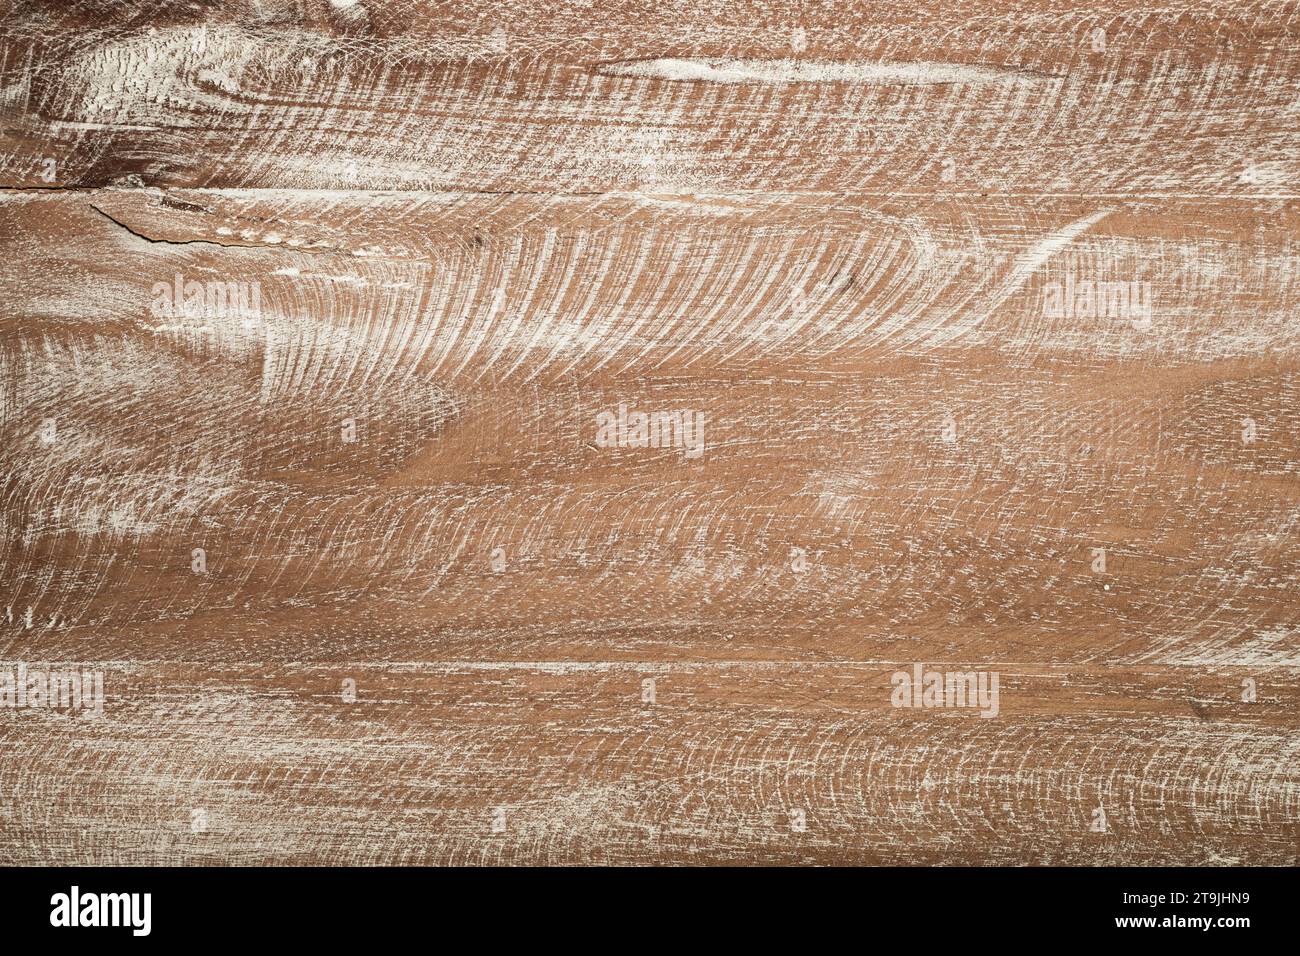 Rough Shabby Chic Texture. Wooden Background With White Paint Worn Off Stock Photo